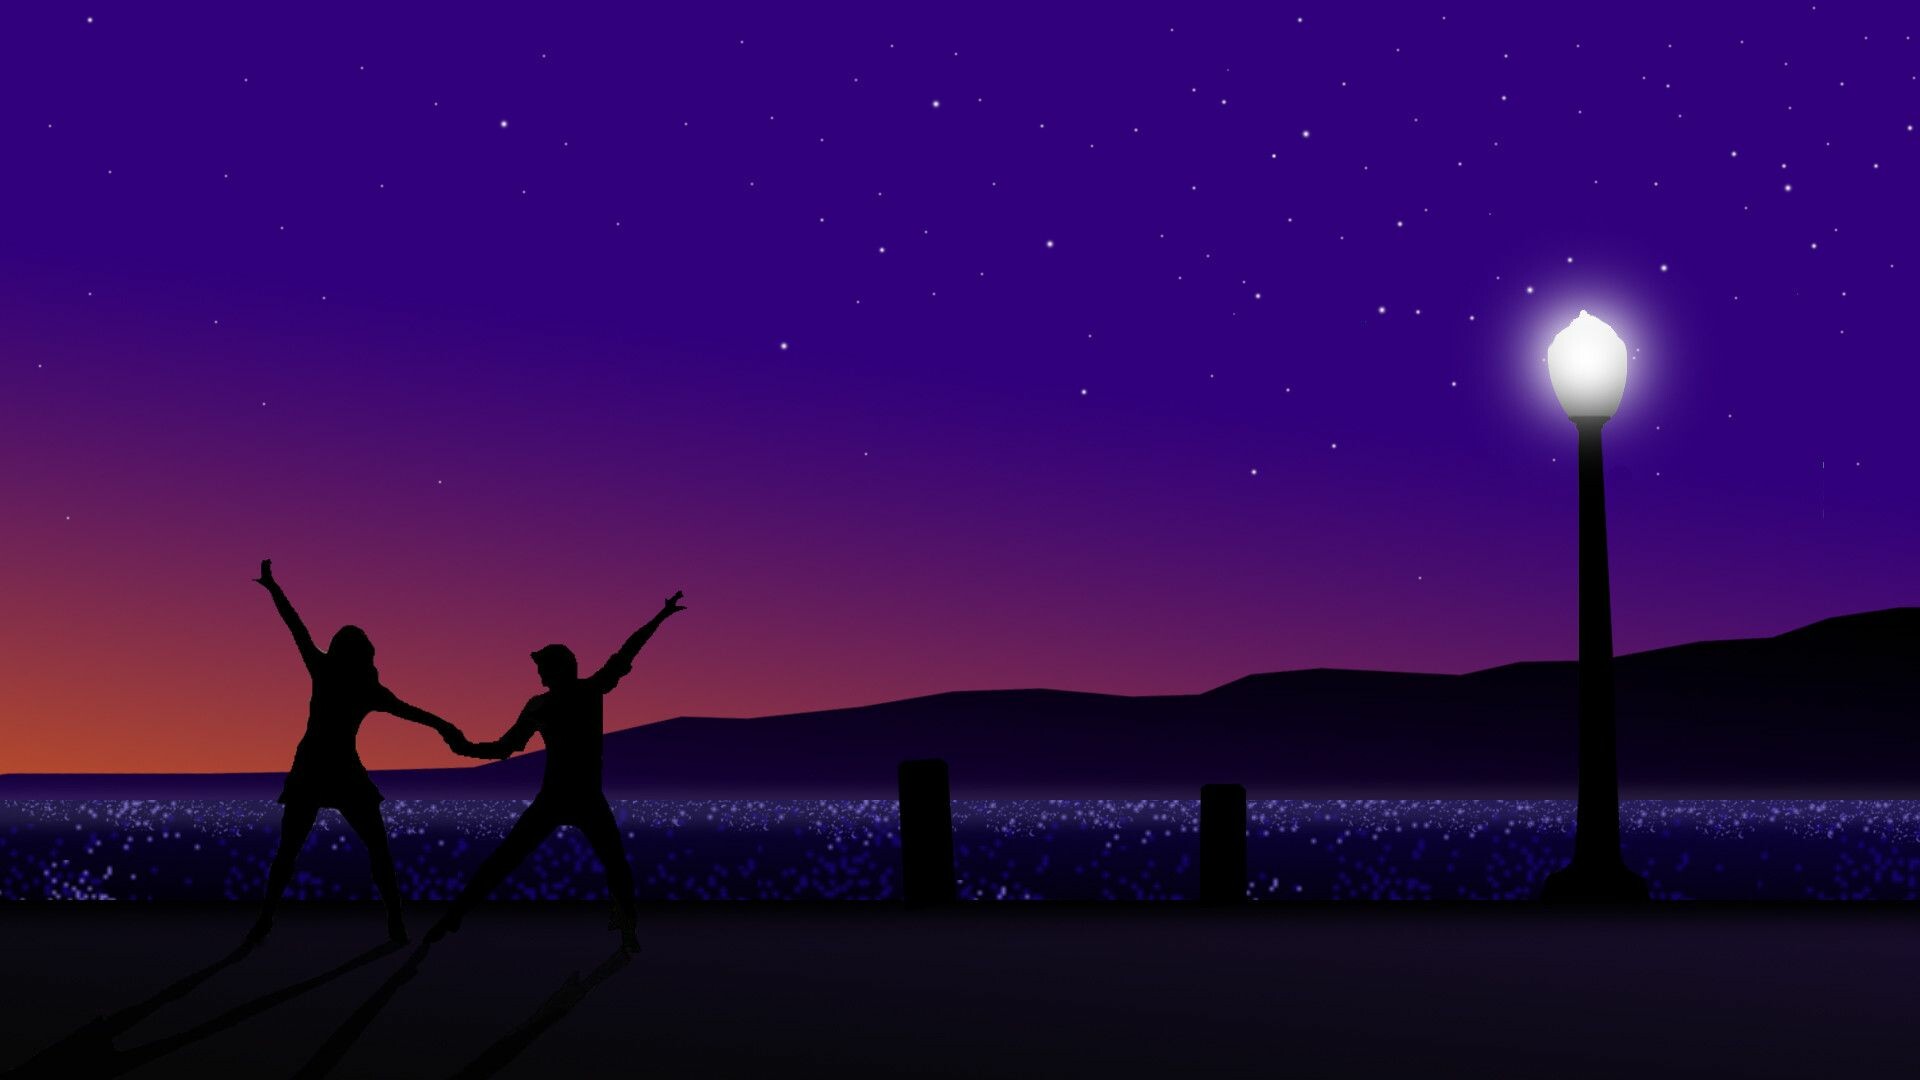 La La Land: A love story set in the present day, but the influence of old Hollywood and musicals of the past is all around. 1920x1080 Full HD Background.